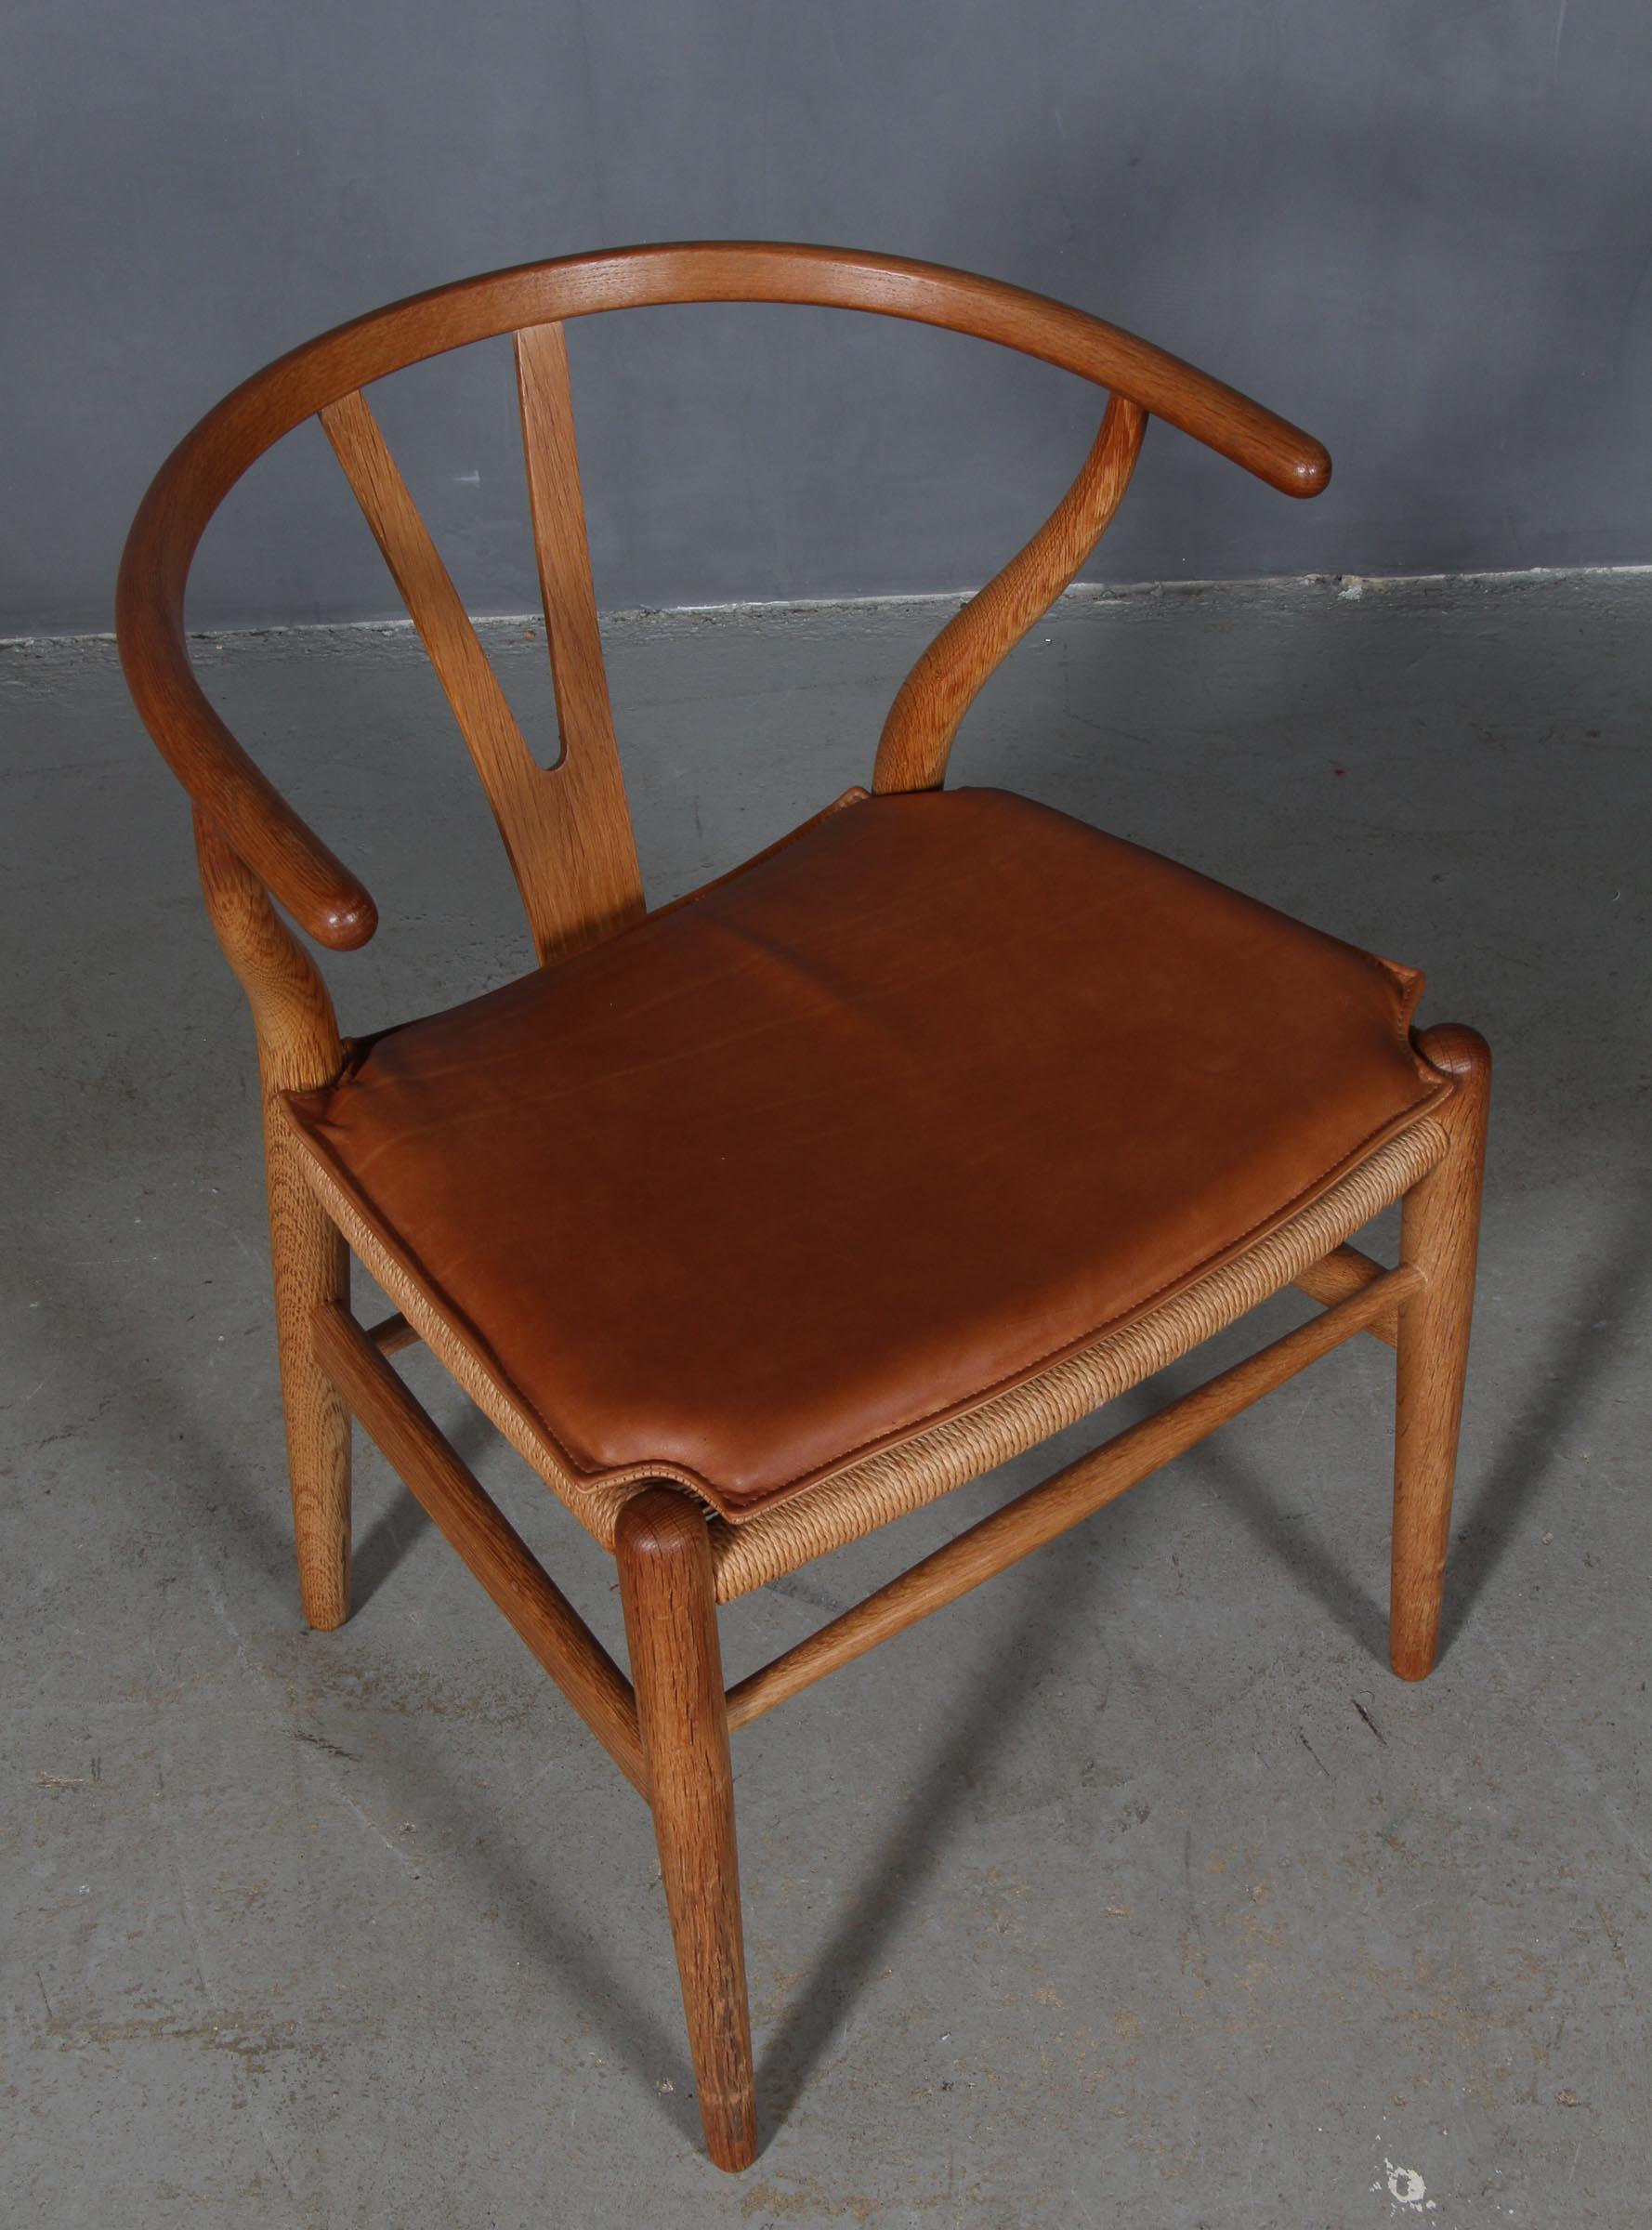 Hans J. Wegner cushions for wishbone chair model CH24.

Made in cognac vintage aniline leather and good quality foam.

Only the cushion, not the chair.